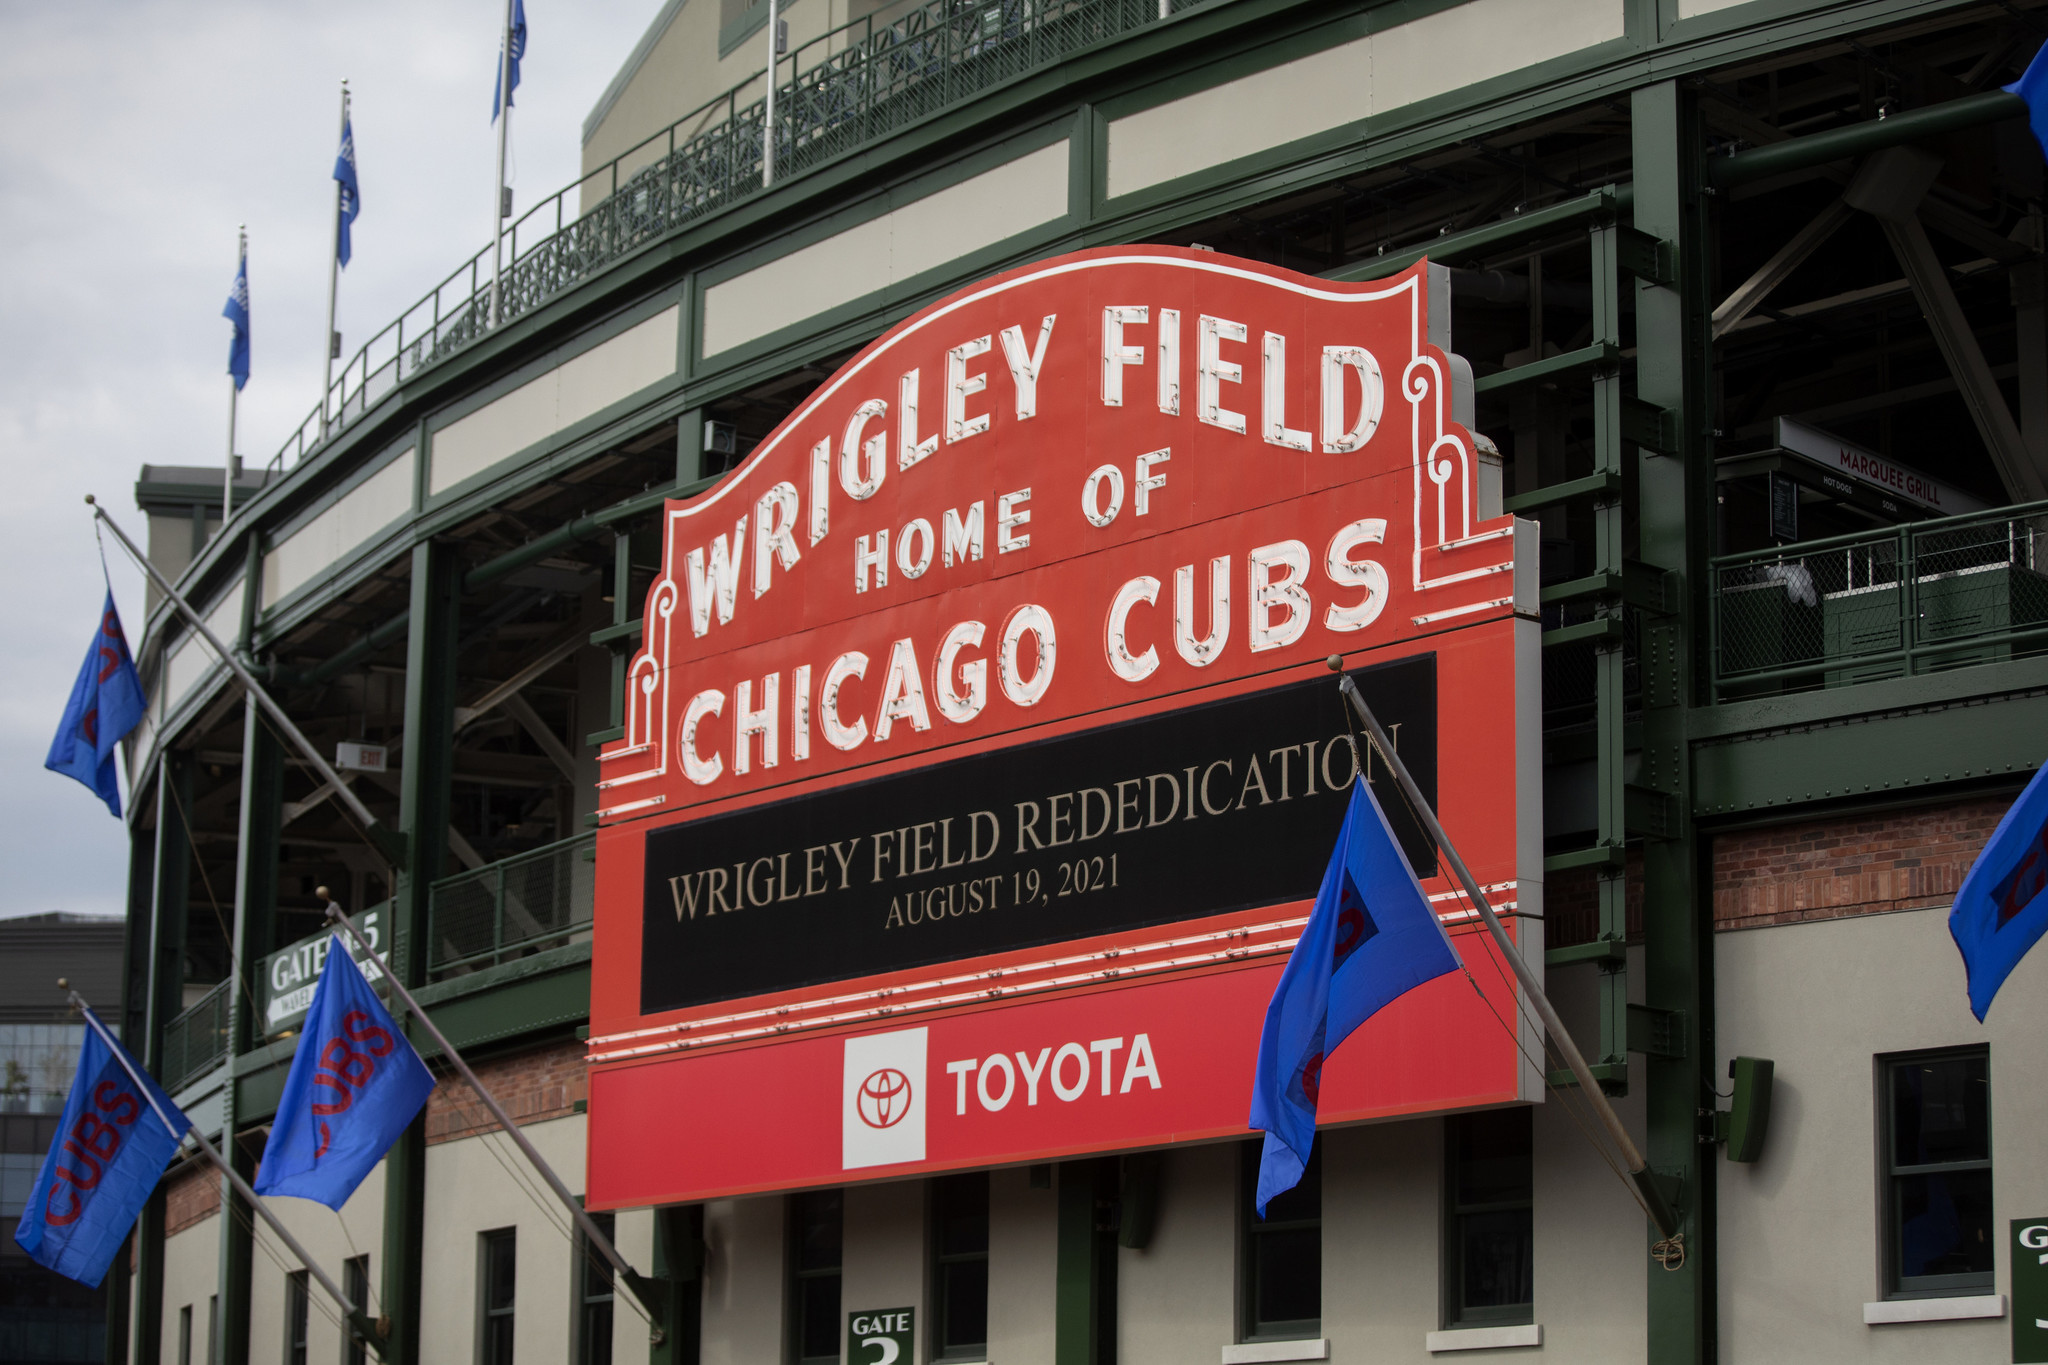 File:Wrigley Field marquee removed for renovation 01.JPG - Wikipedia